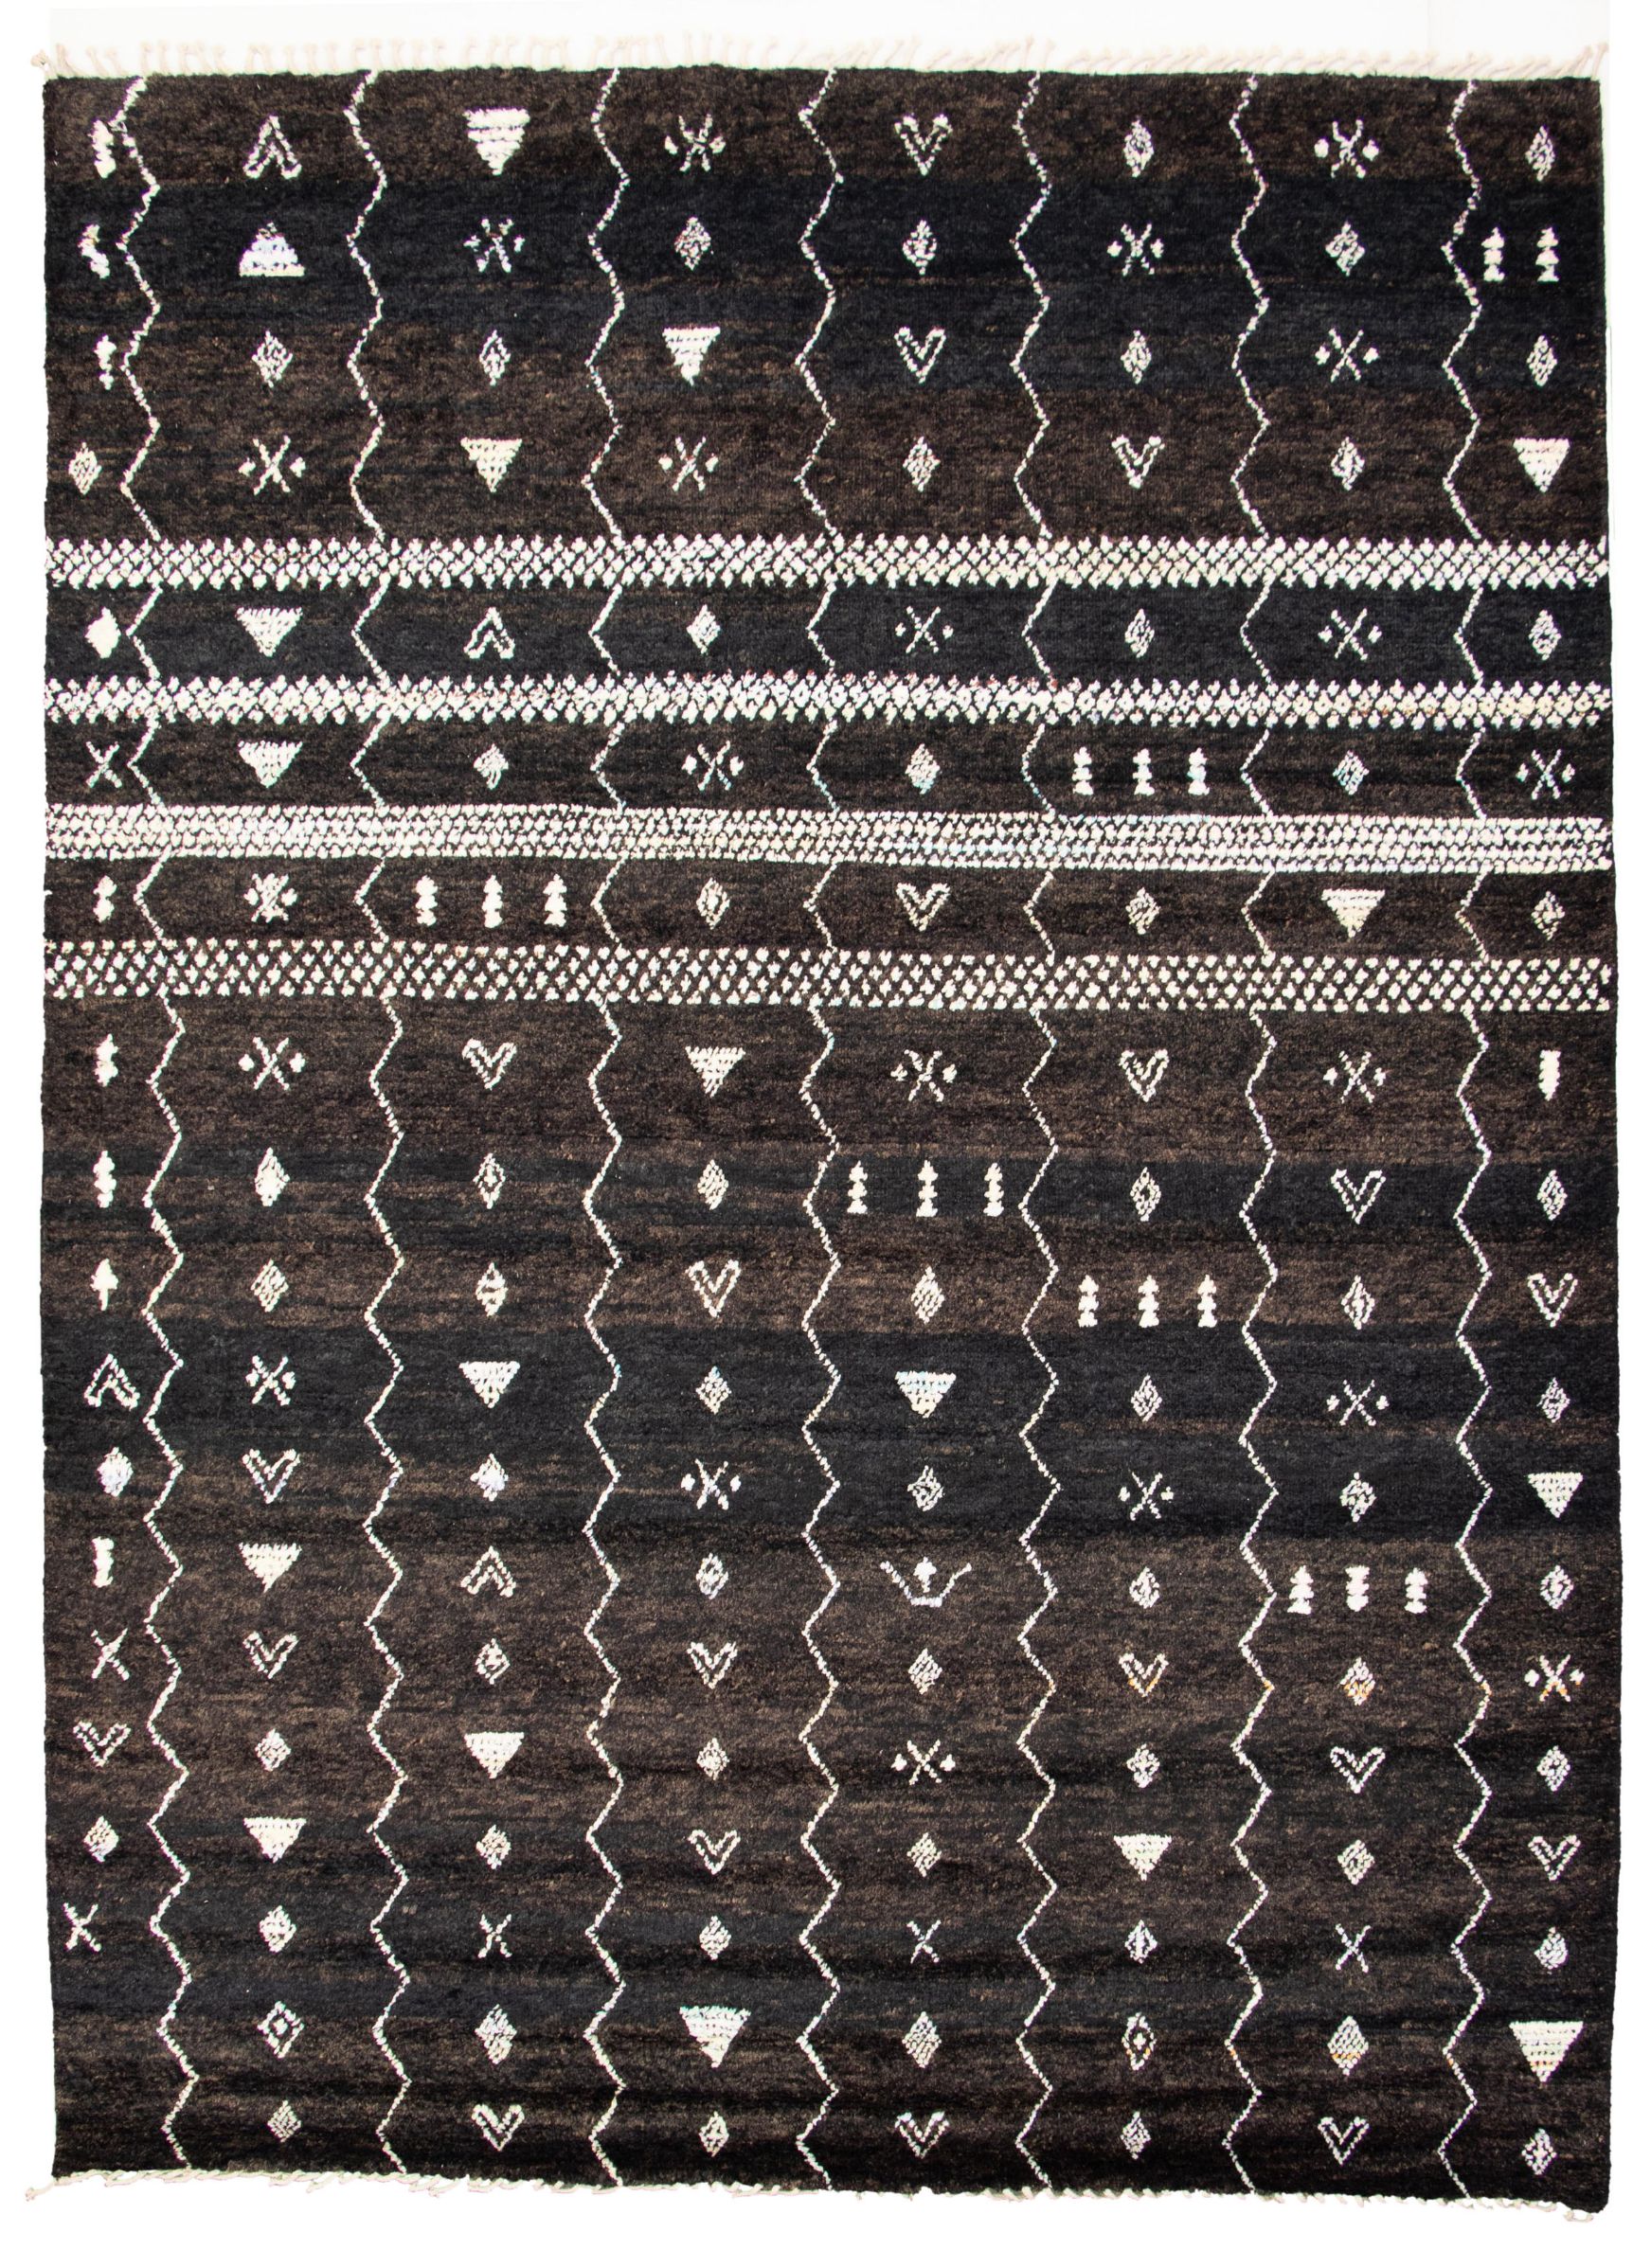 Hand-knotted Marrakech Black Wool Rug 9'1" x 12'4" Size: 9'1" x 12'4"  